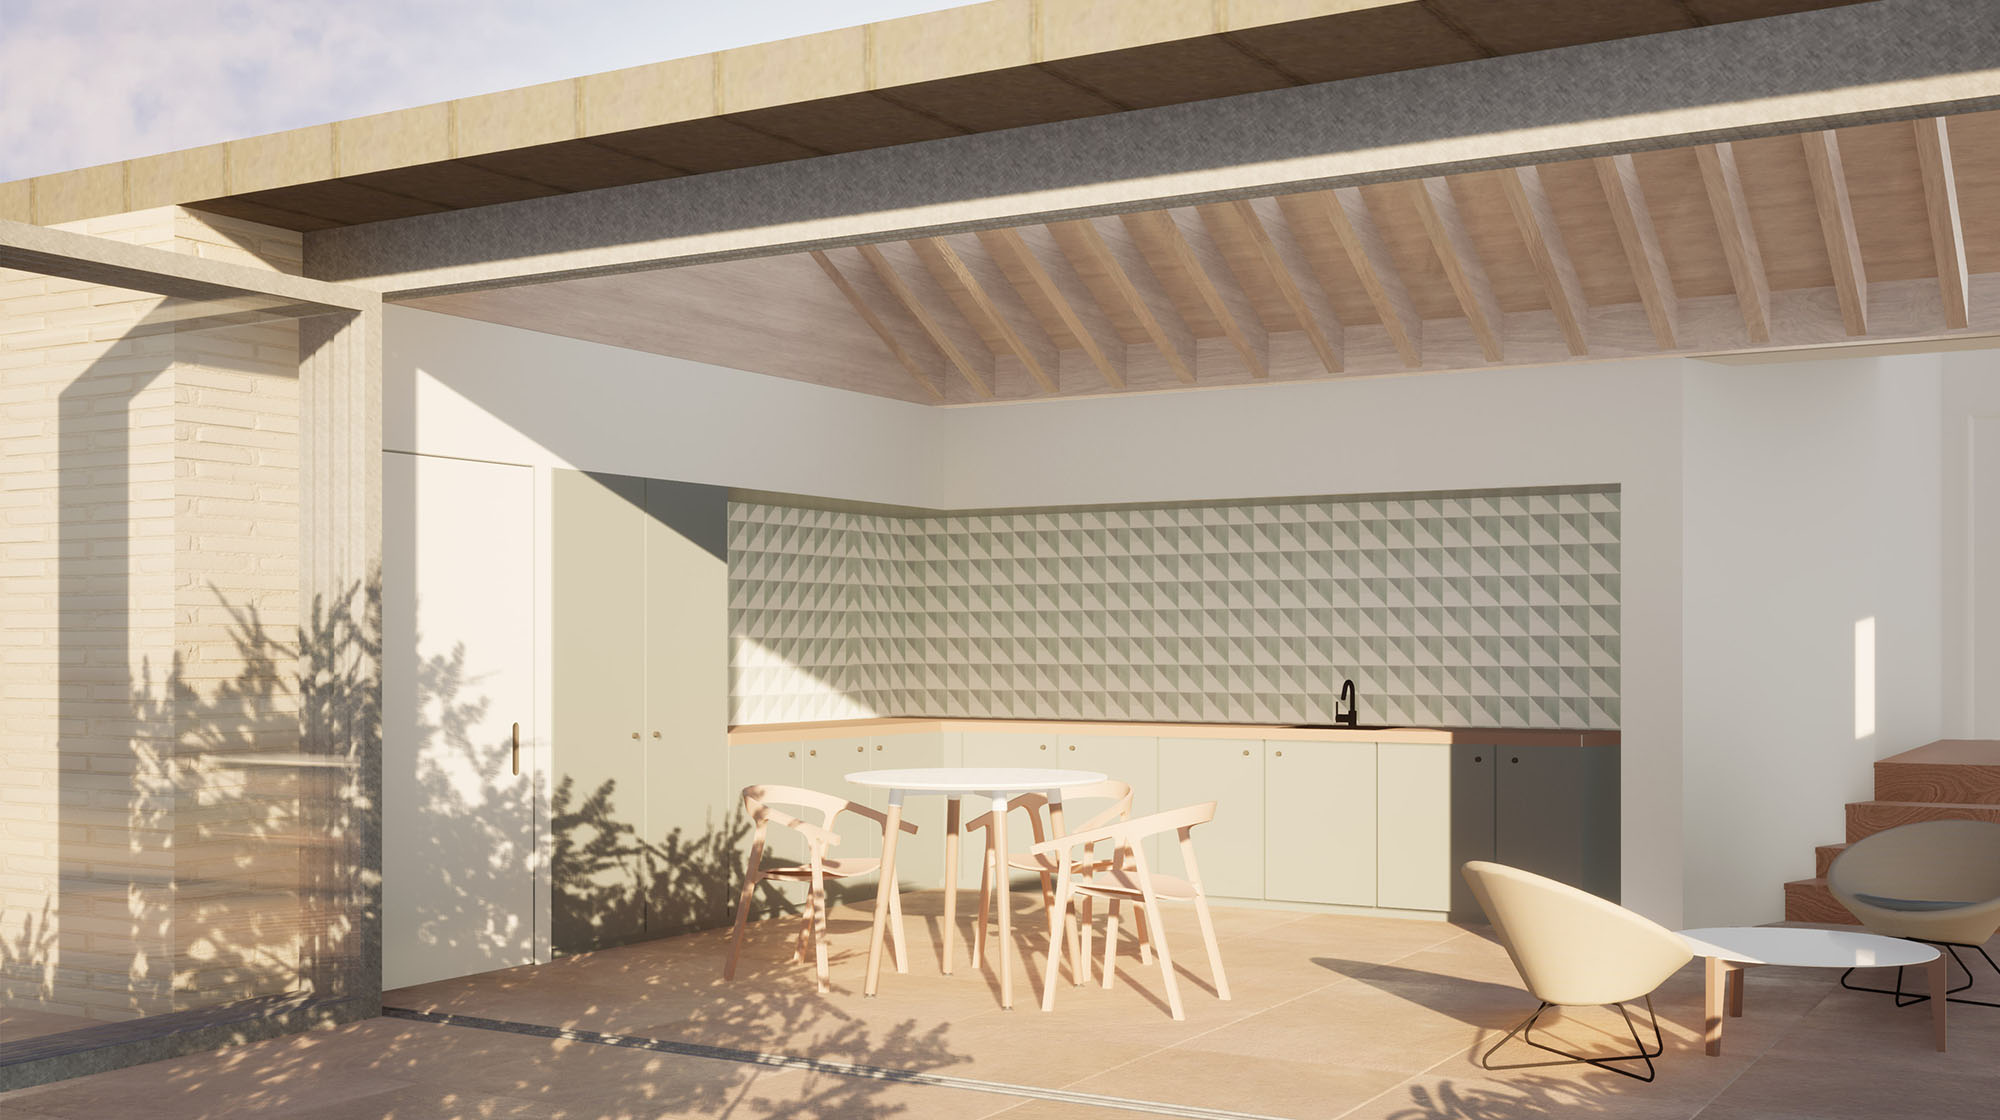 Planning Approval for West Edinburgh House Extension{categories}, {category_name}{/categories}